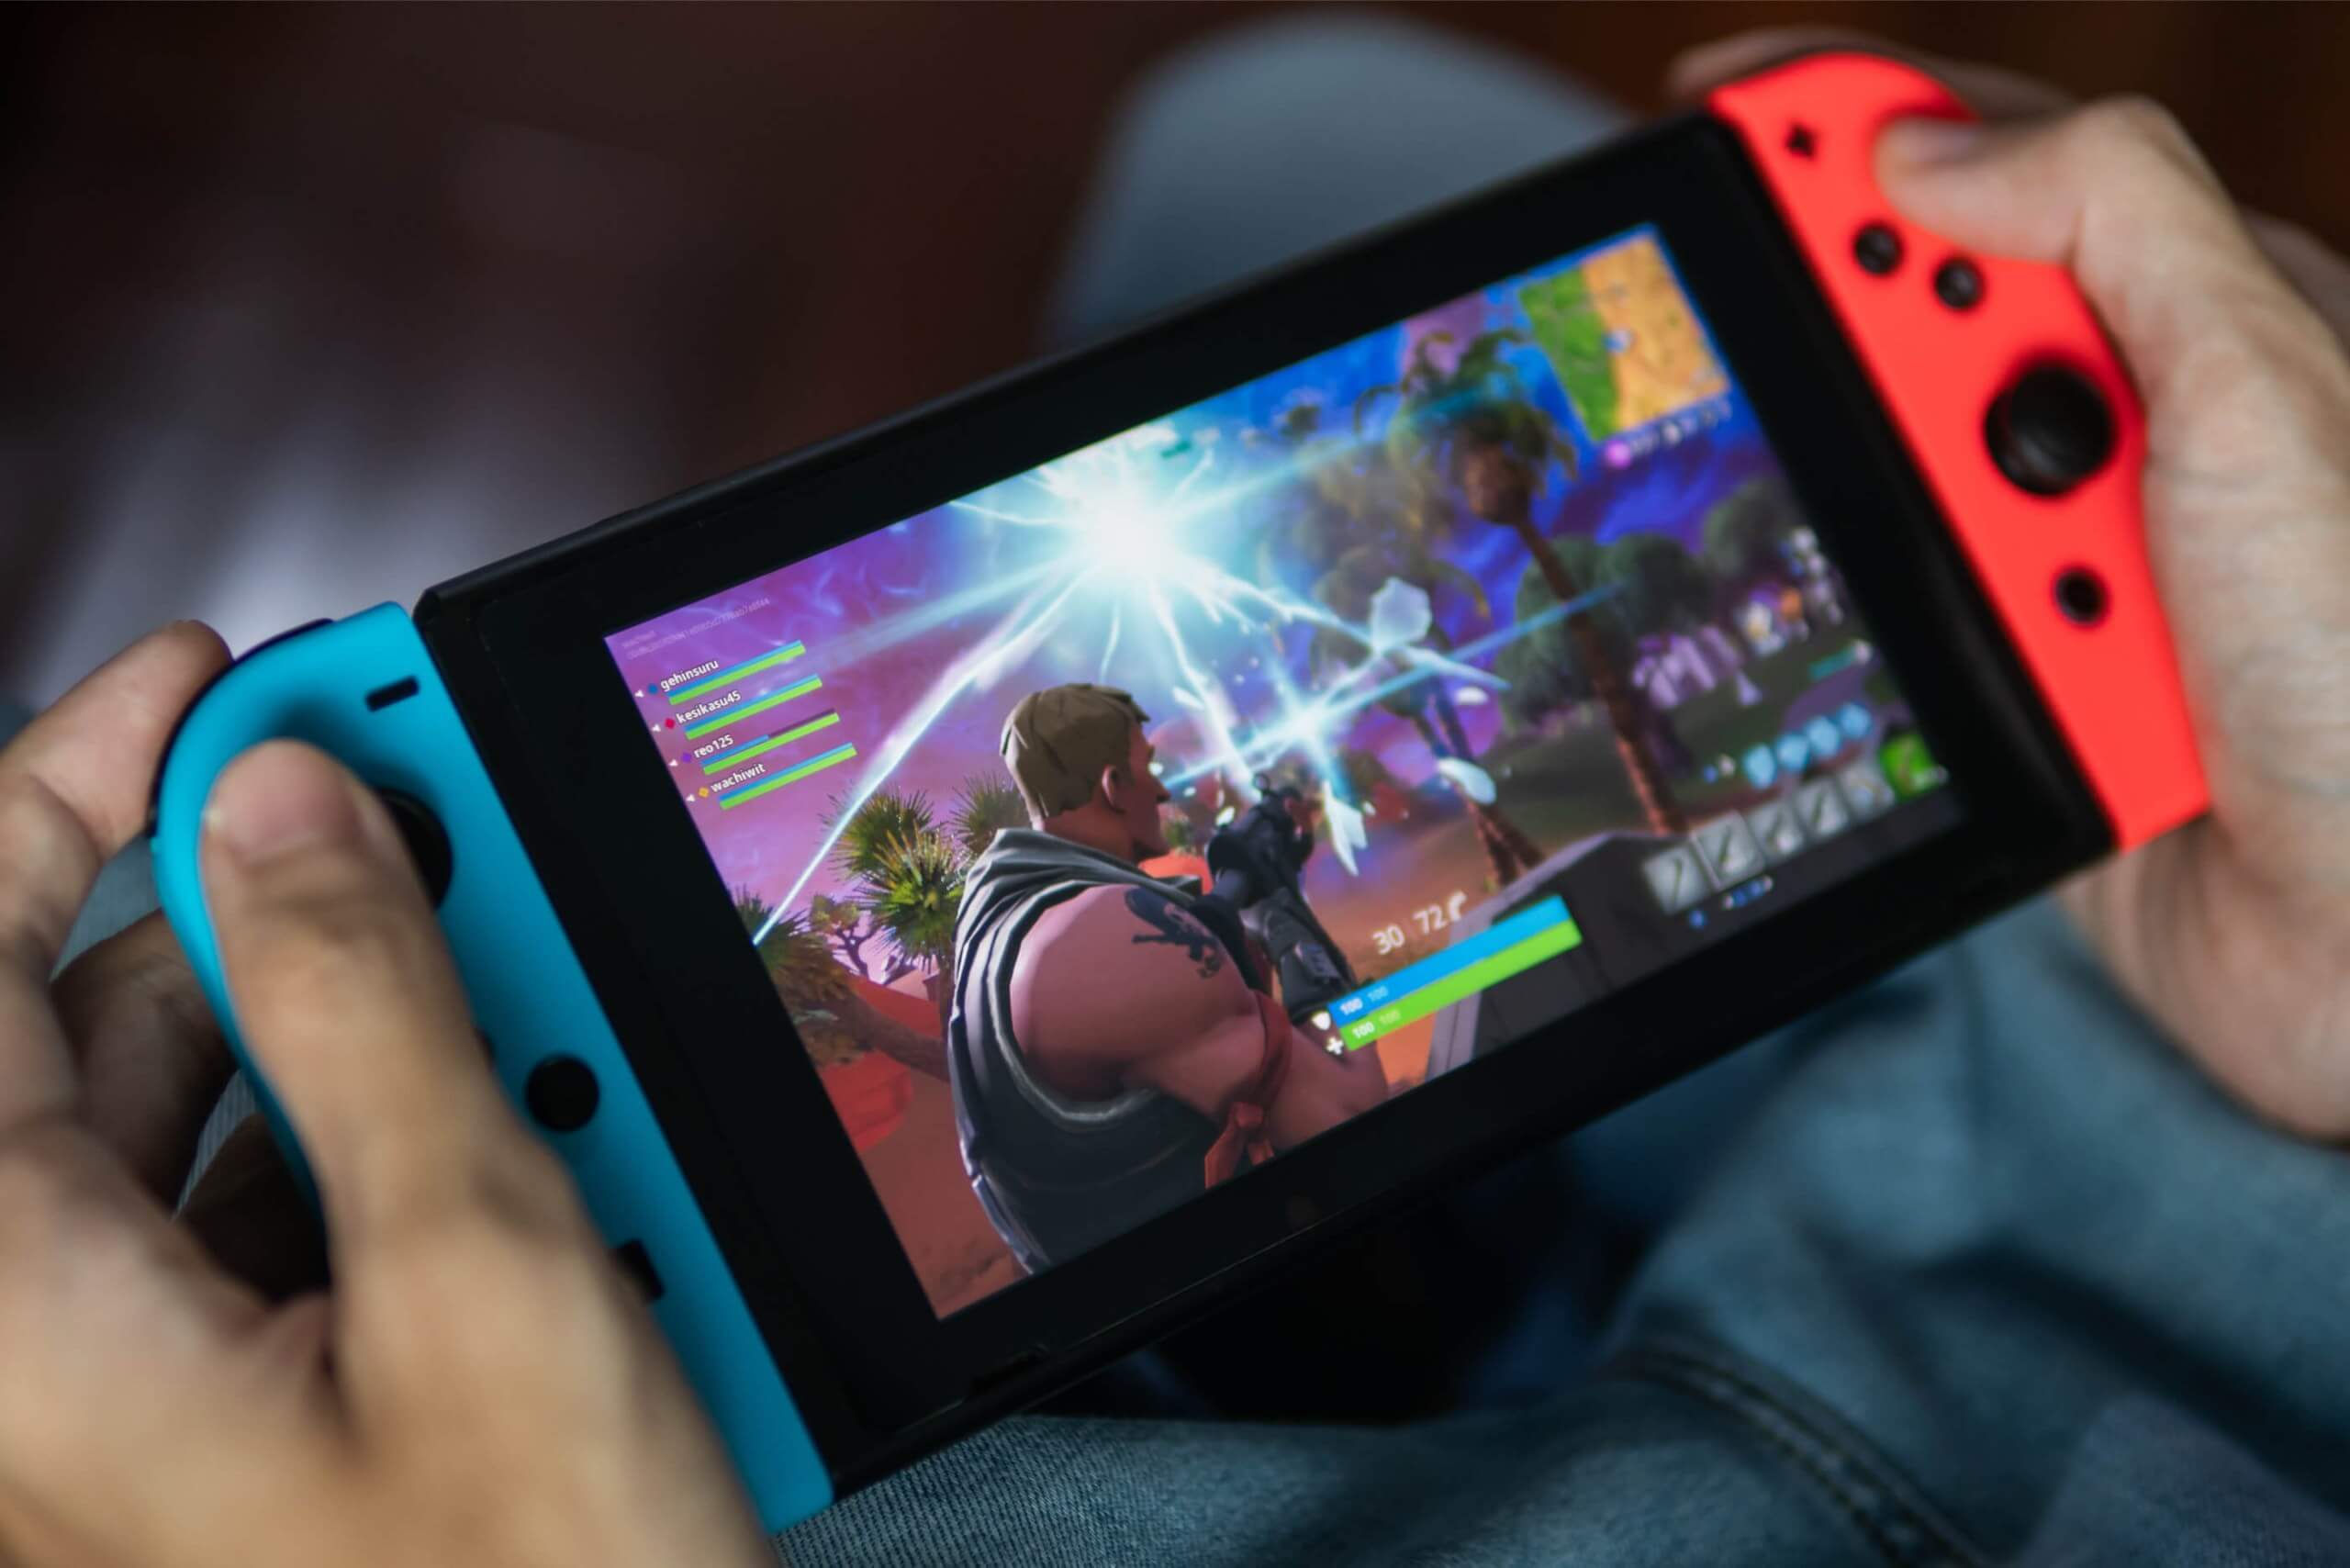 Nintendo has plans for a small upgrade to the original Switch